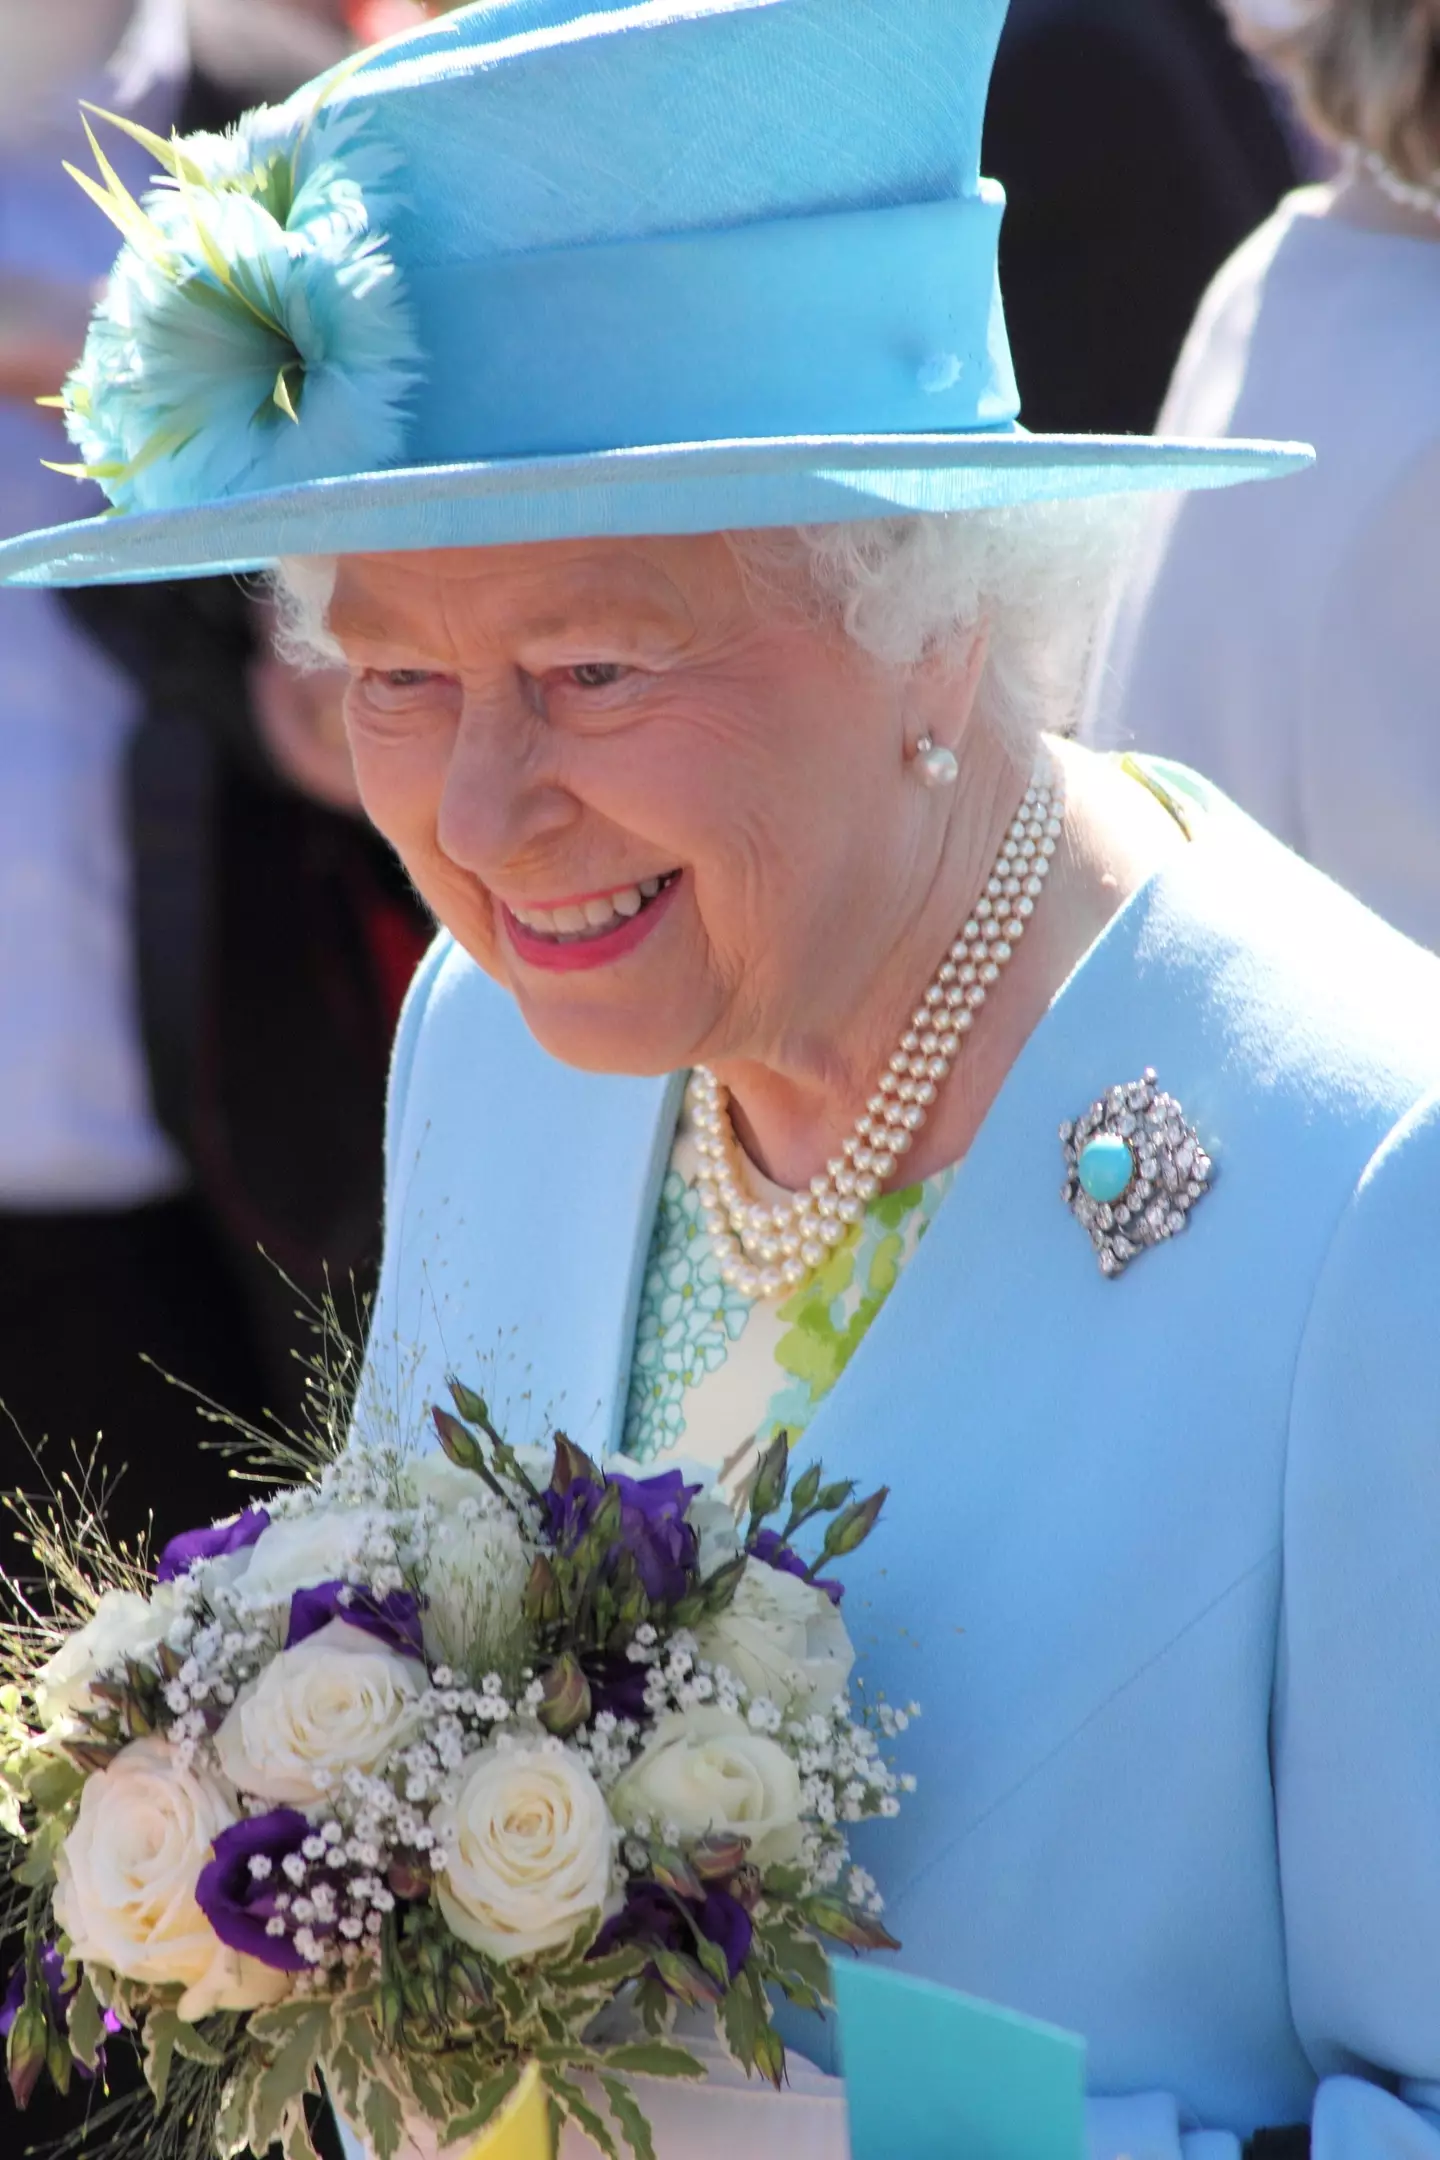 The Queen passed away on 8 September 2022.